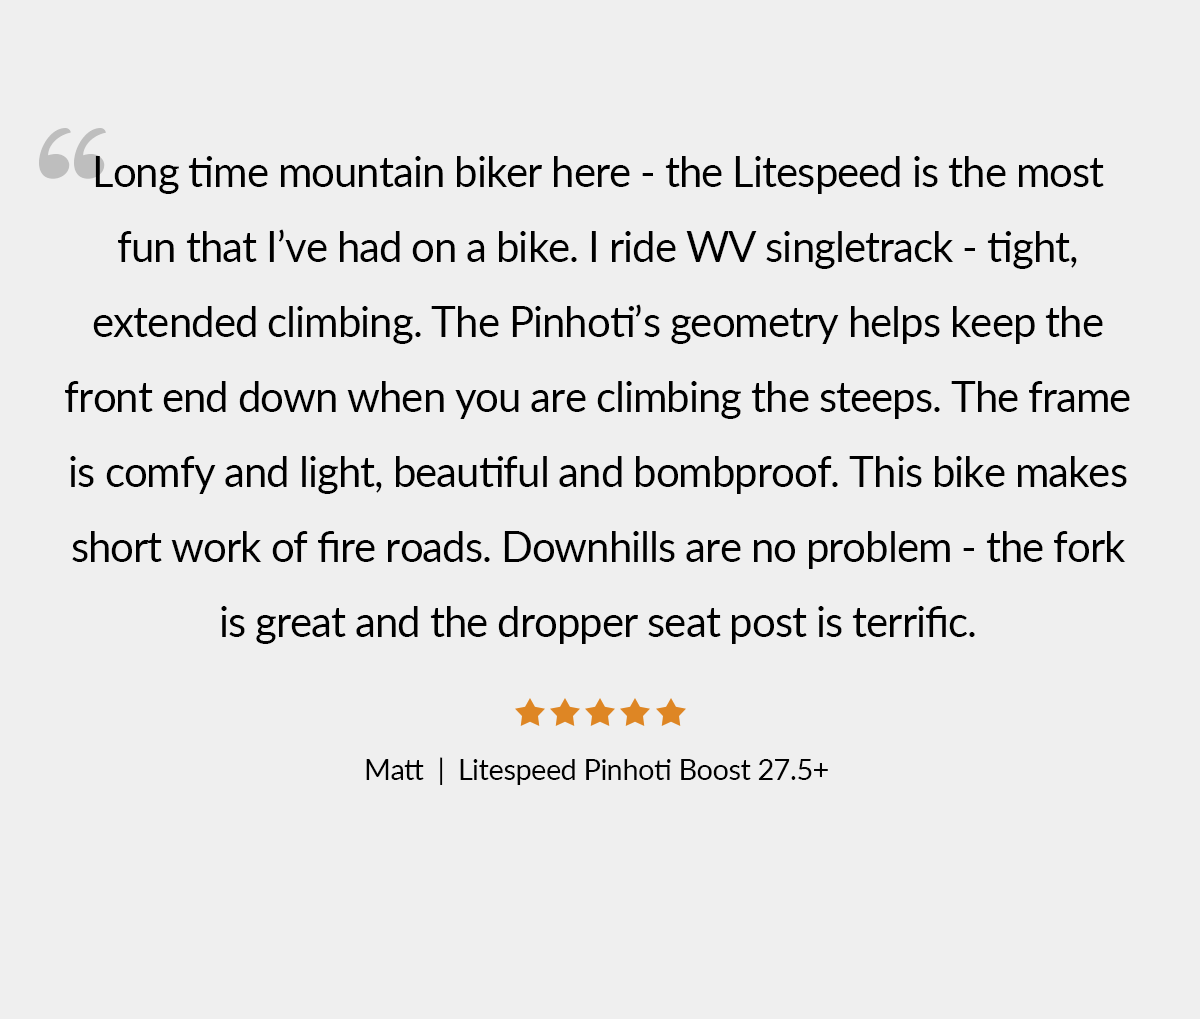 See what customers are saying about their Litespeed bikes.